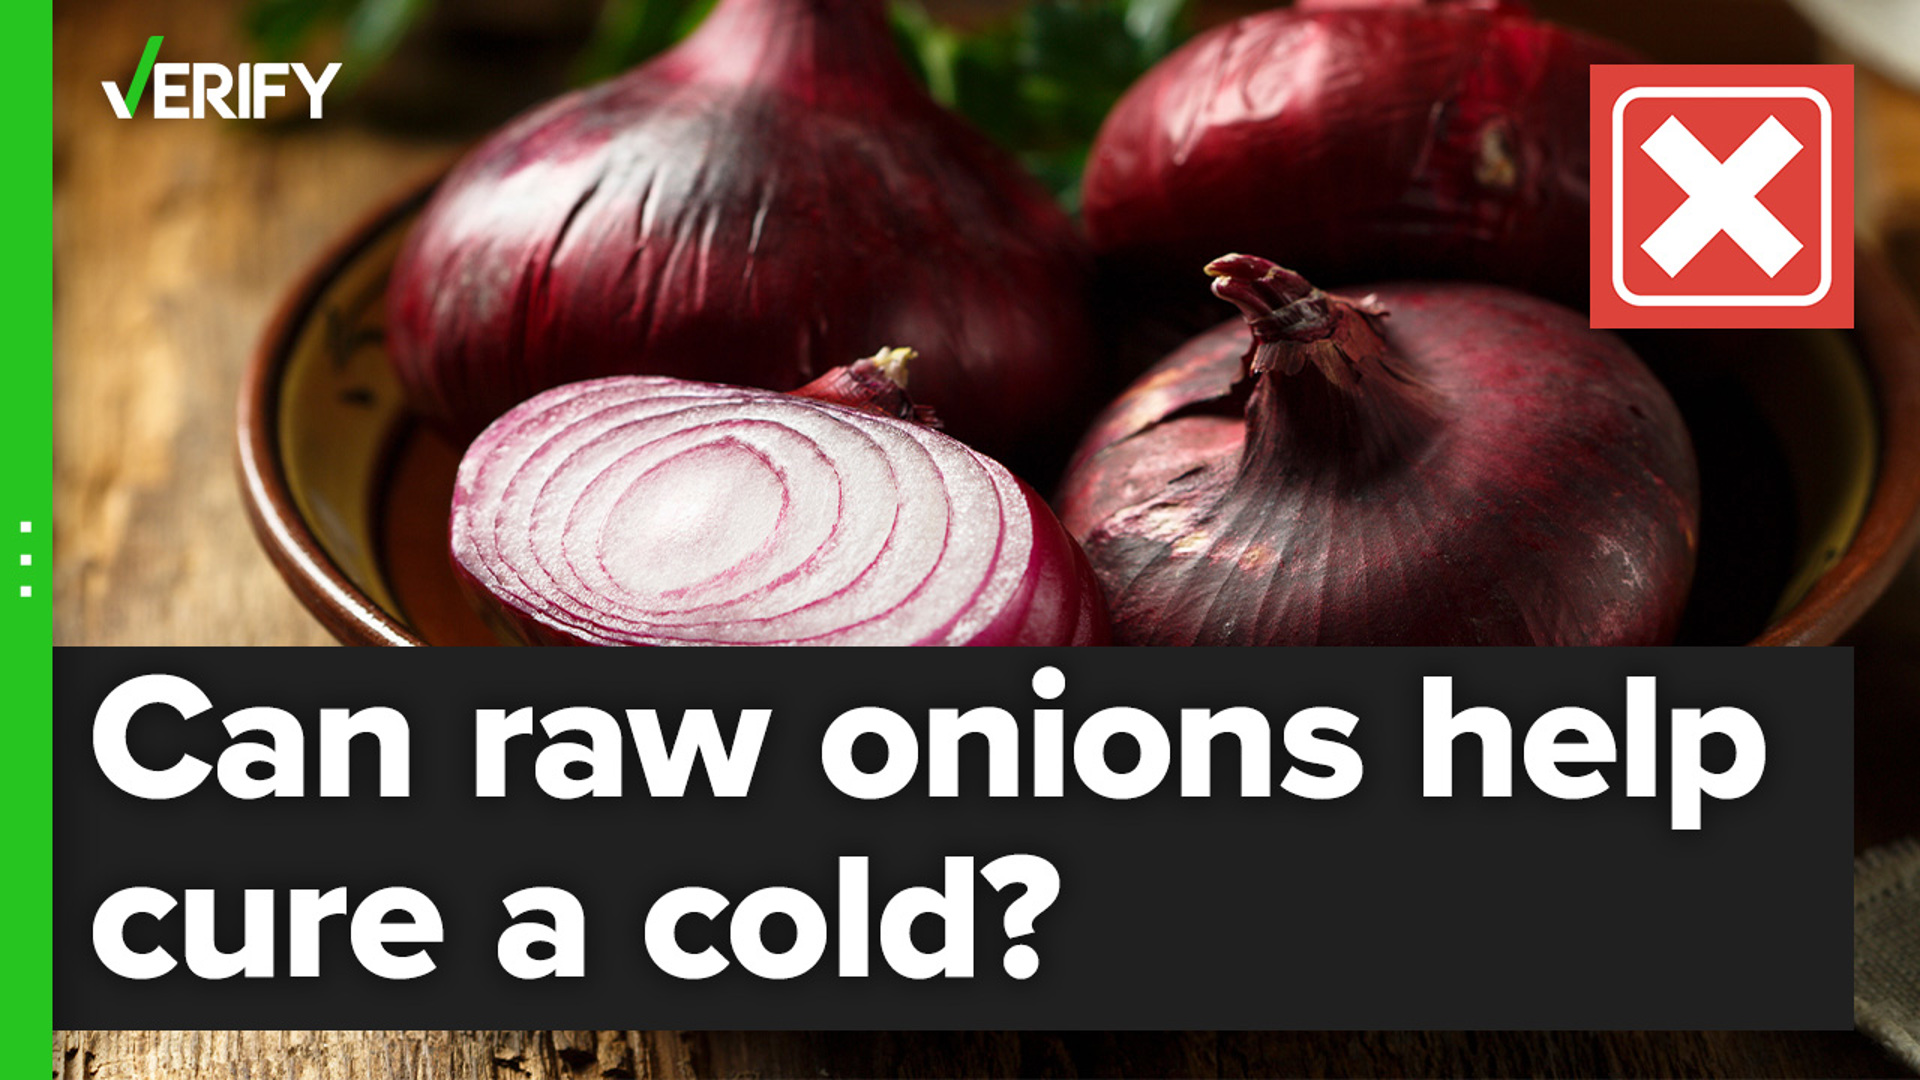 Onions can’t absorb germs from the air or from skin. Even if they could, they wouldn’t kill pathogens or “detox” your body.